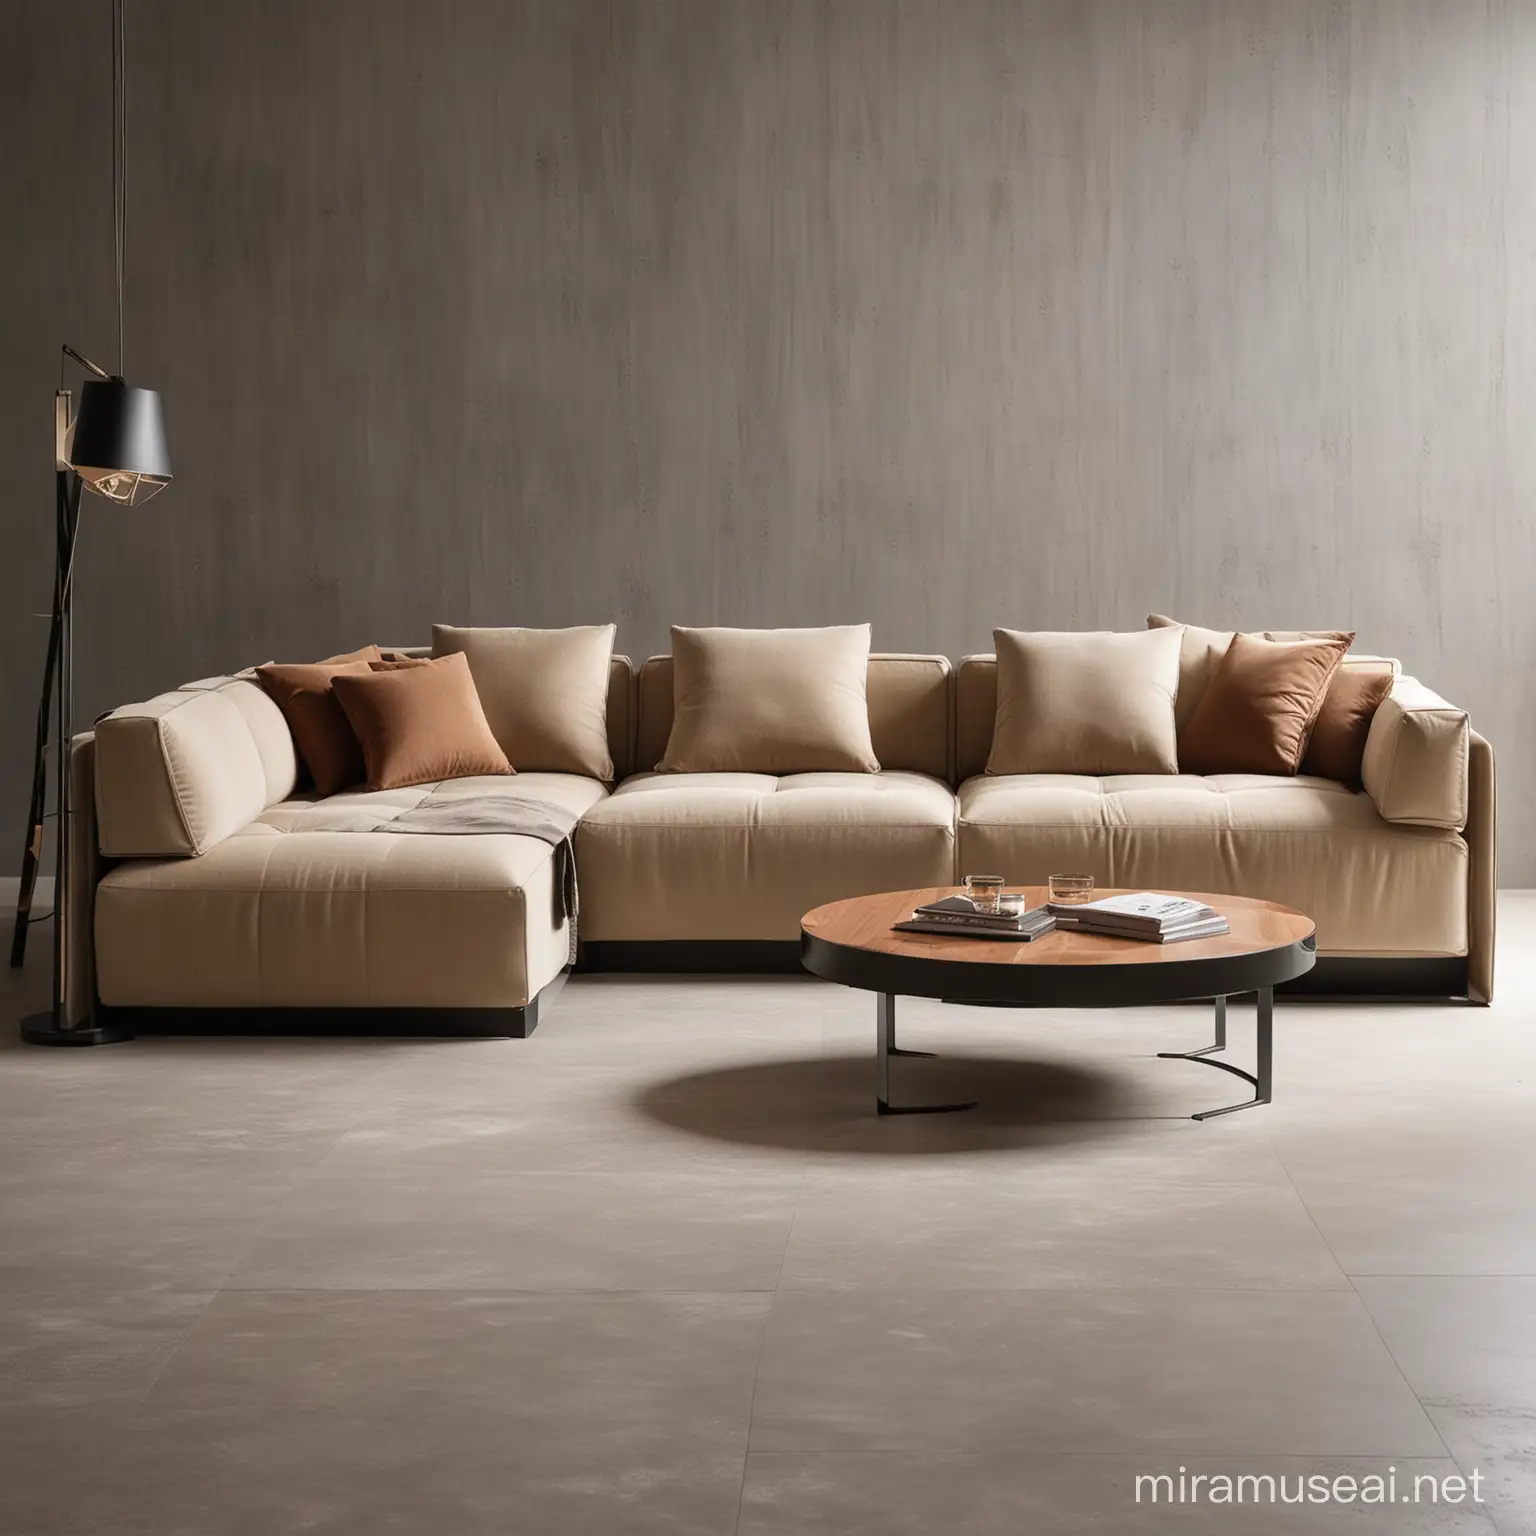 Luxury Italian Style Modular Sofa with Geometric Design and Multifunctional Features